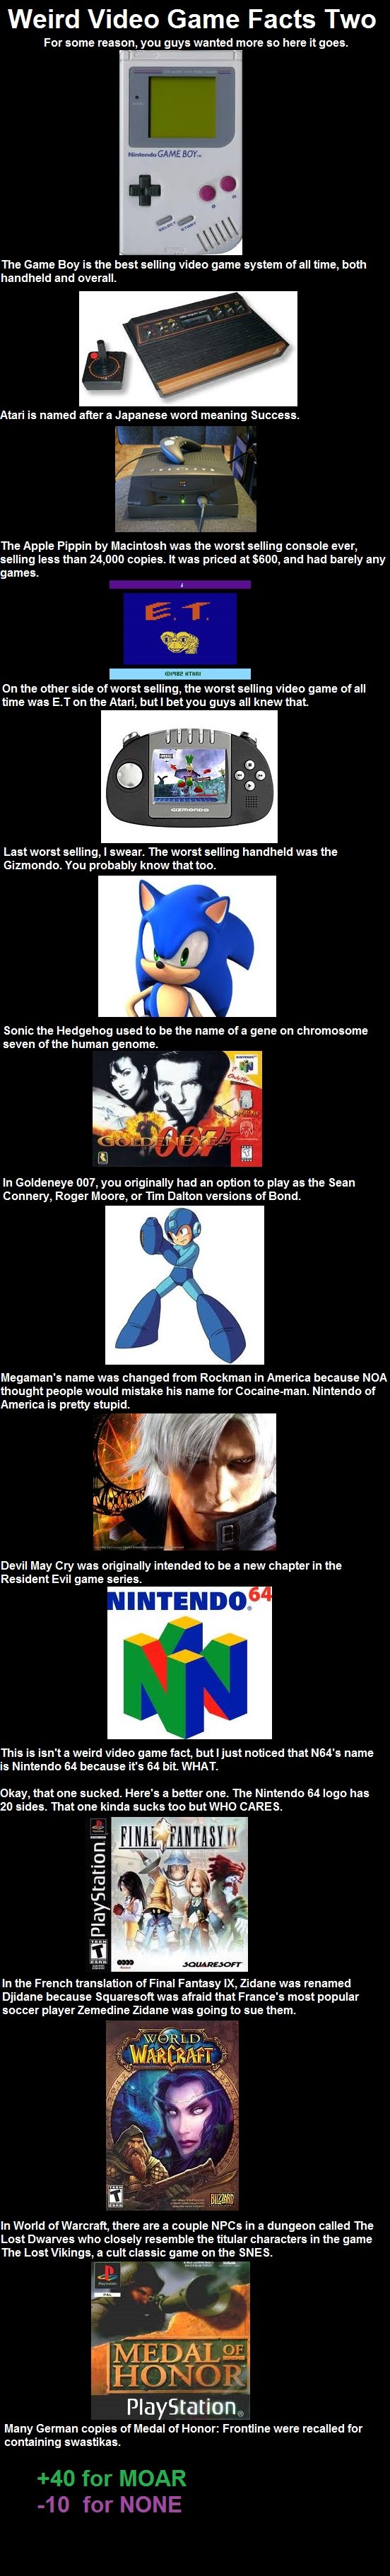 Weird Video Game Facts part 2. If this gets +40 thumbs I'm going to make the next edition the &amp;amp;amp;quot;firsts&amp;amp;amp;quot; edition.&lt;br /&gt; PA